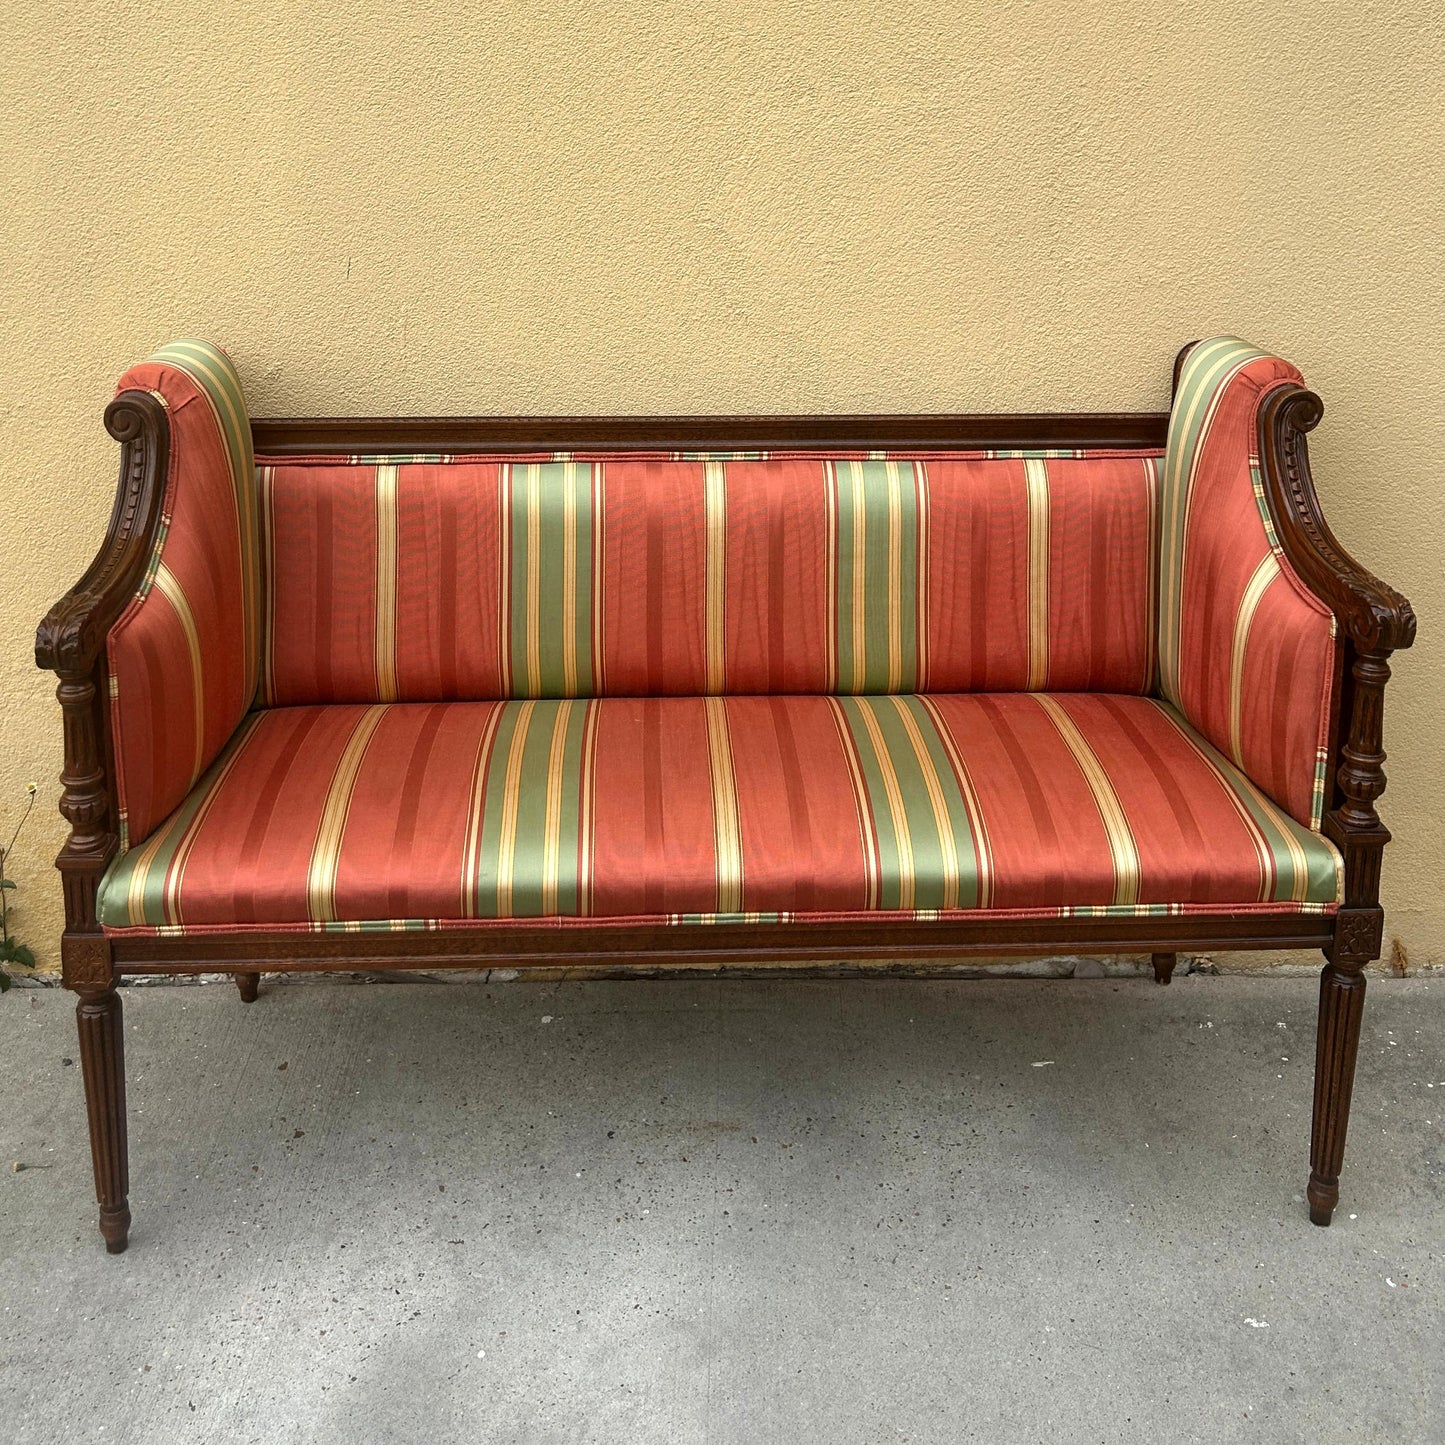 Vintage French Style Upholstered Settee